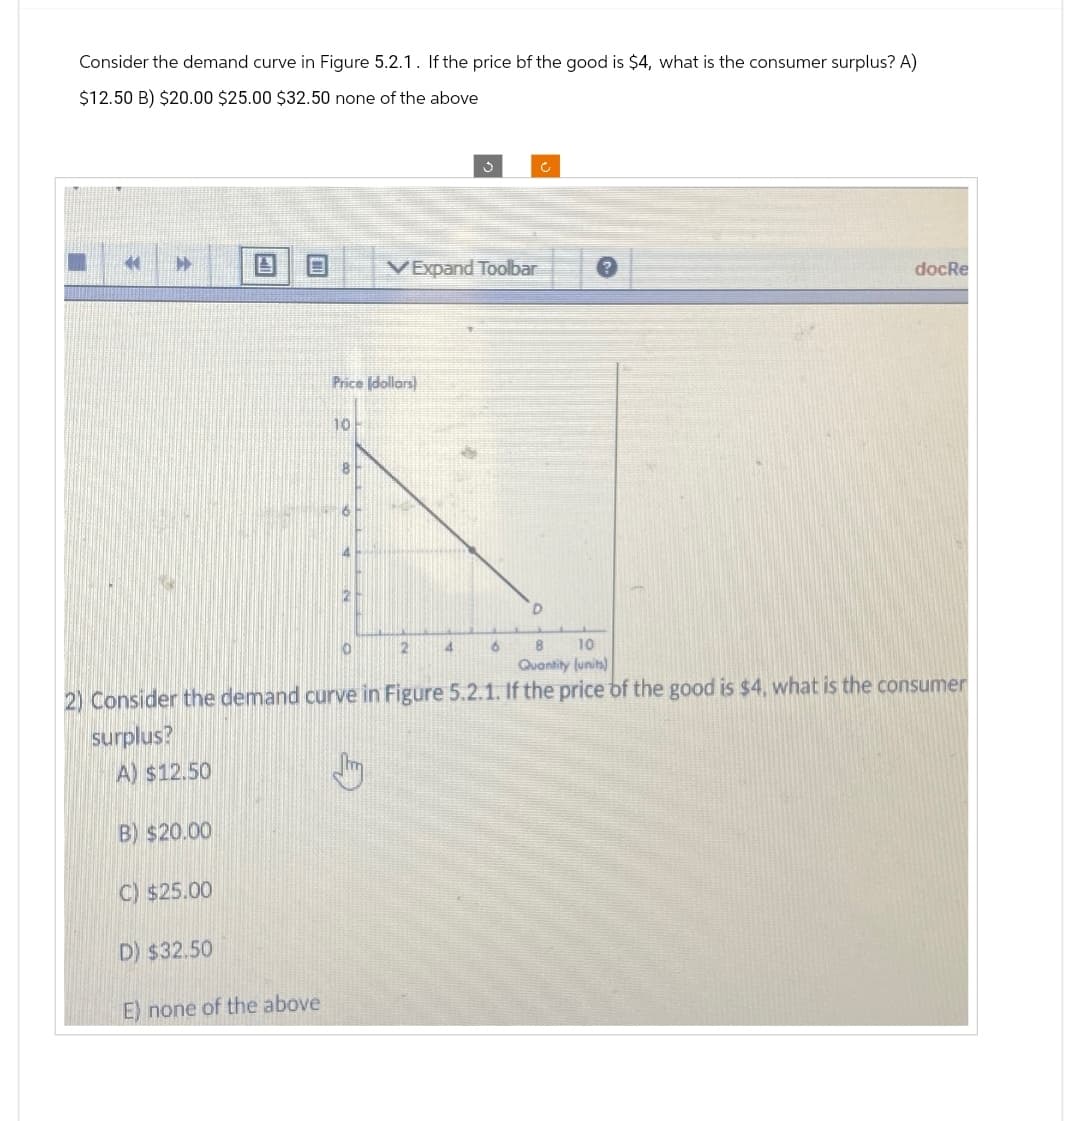 Consider the demand curve in Figure 5.2.1. If the price of the good is $4, what is the consumer surplus? A)
$12.50 B) $20.00 $25.00 $32.50 none of the above
44 ▶
A) $12.50
B) $20.00
C) $25.00
D) $32.50
E) none of the above
Price (dollars)
10
8
6
A
0
VExpand Toolbar
2
3
4
6
8 10
Quantity (units)
2) Consider the demand curve in Figure 5.2.1. If the price of the good is $4, what is the consumer
surplus?
c
D
7
docRe